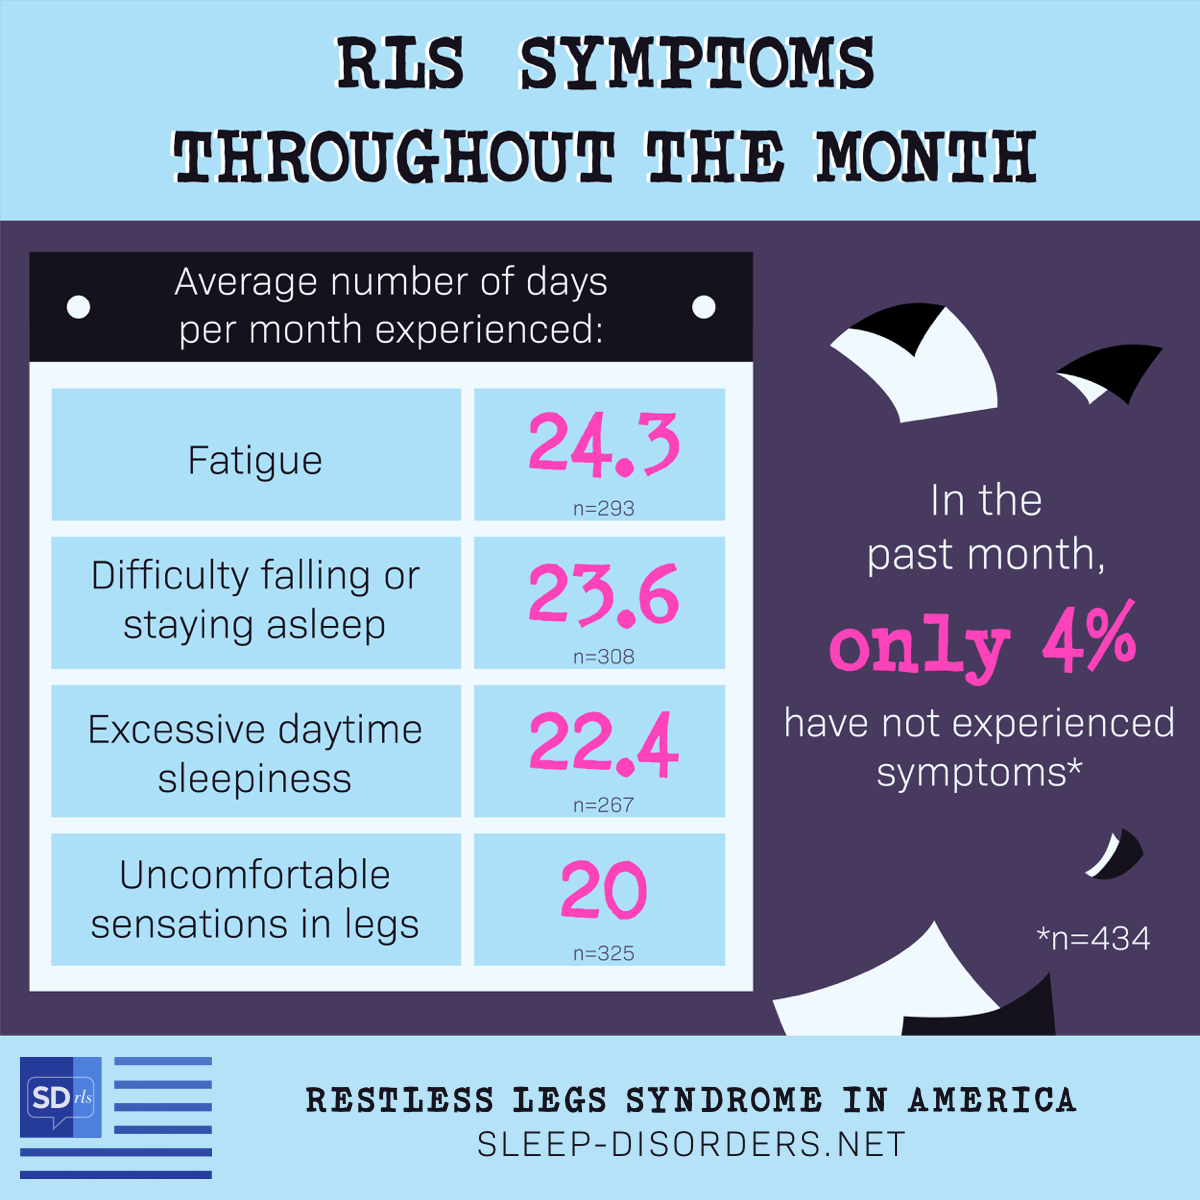 Uncomfortable sensations in legs, fatigue, difficulty falling or staying asleep, and excessive sleepiness were felt an average of 20+ days per month. 4% had no symptoms in the past month.